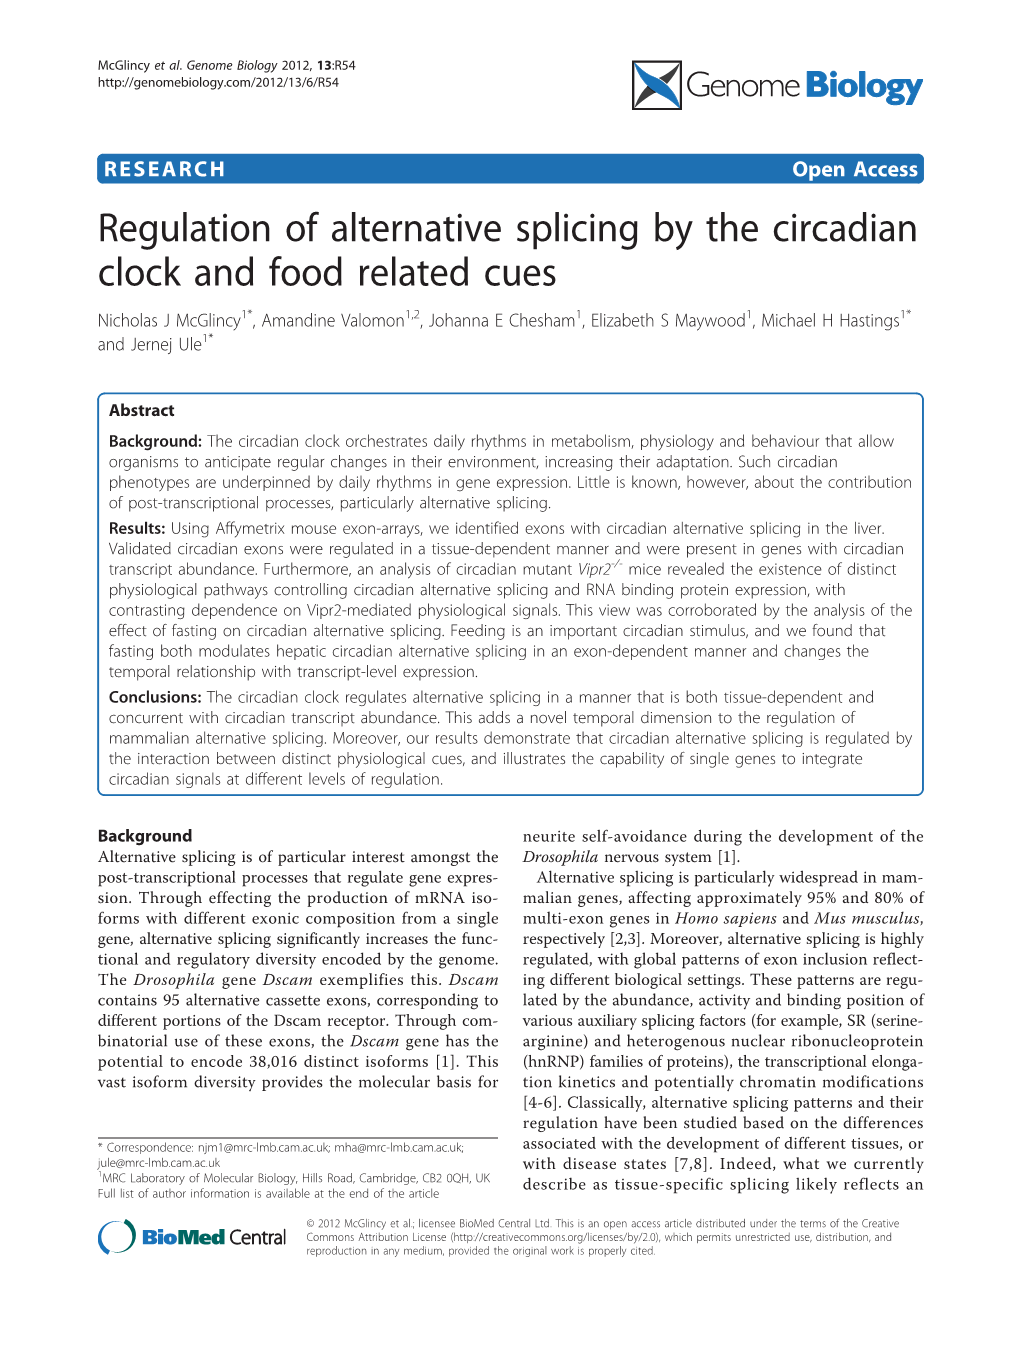 Regulation of Alternative Splicing by the Circadian Clock and Food Related